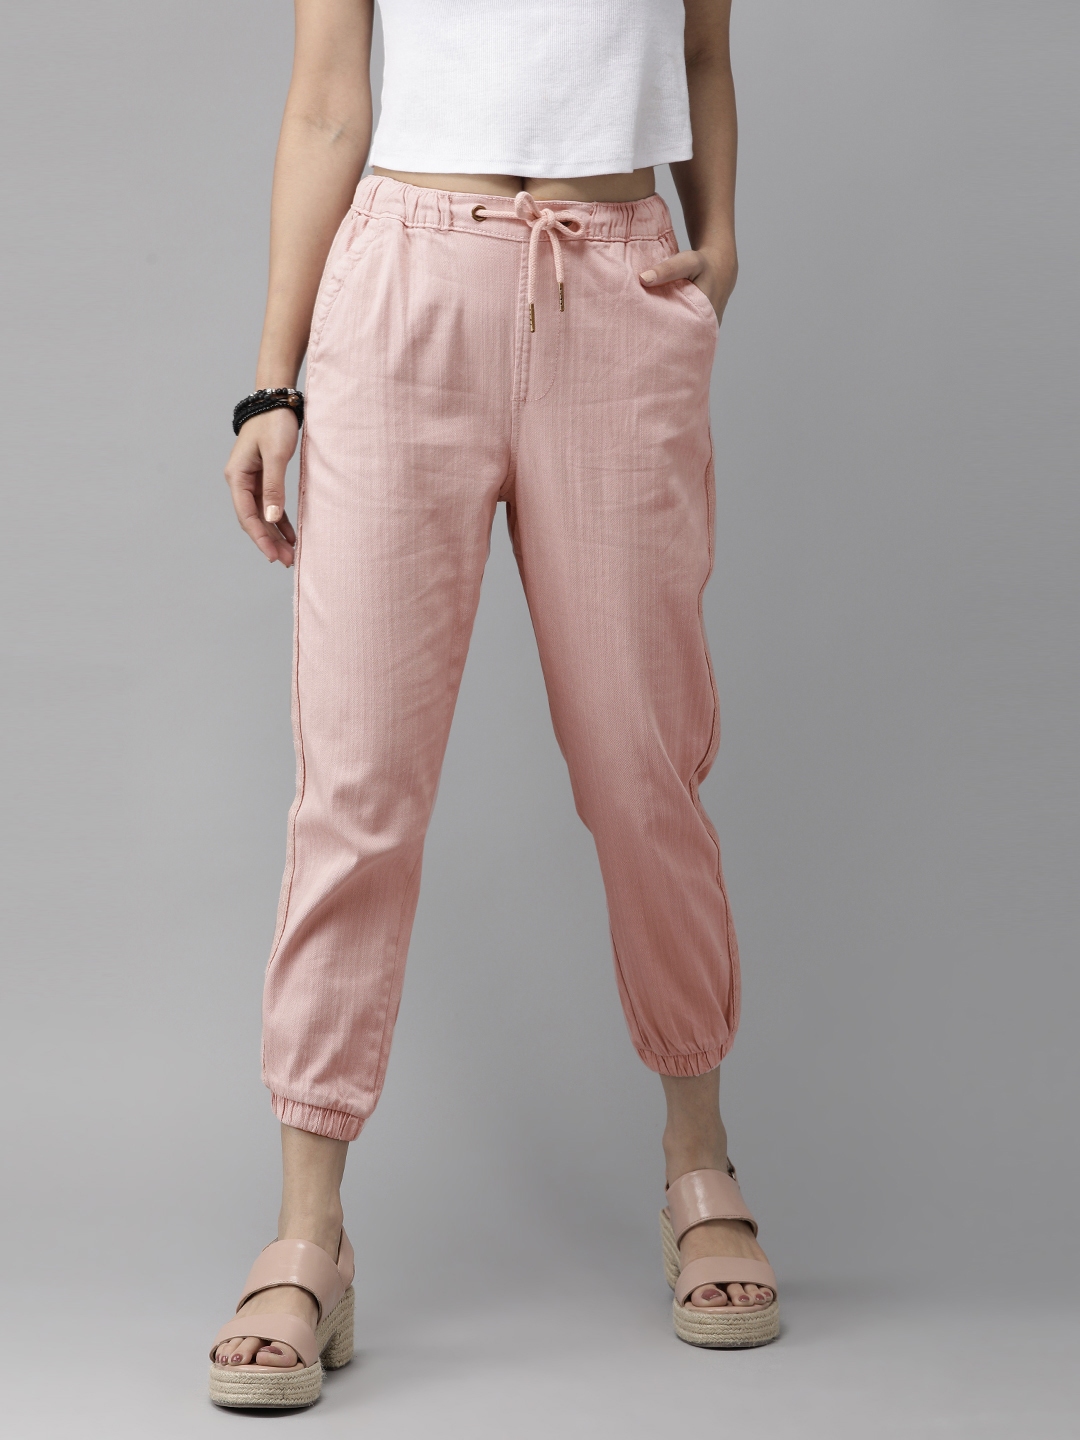 Pink Joggers For Women